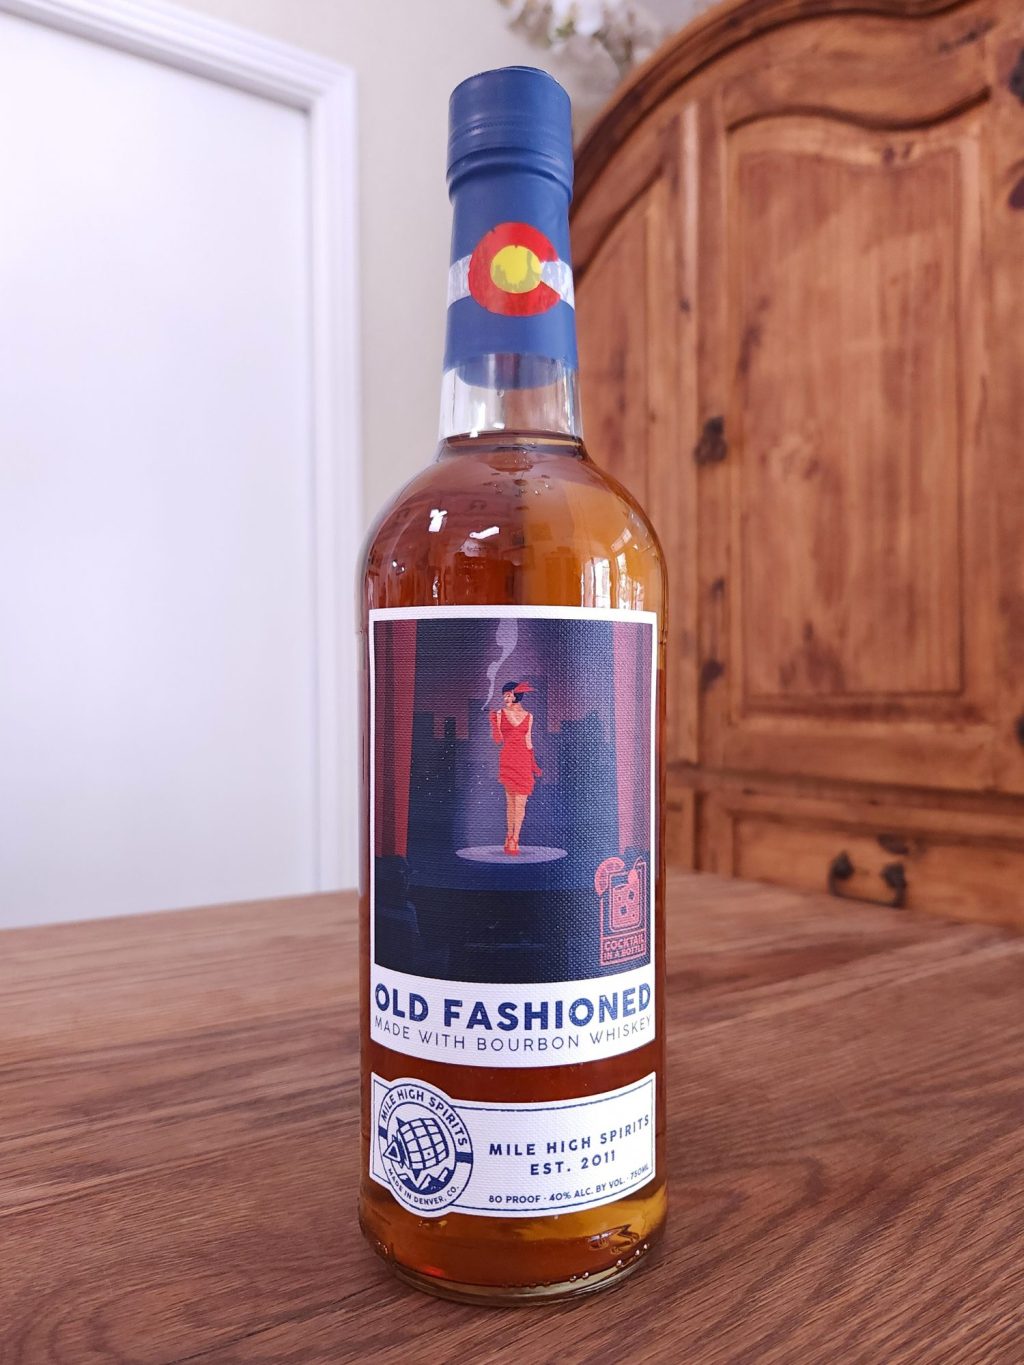 Bottle of Fireside Old Fashioned sitting on a wooden table, in front of a mixed white and wooden background